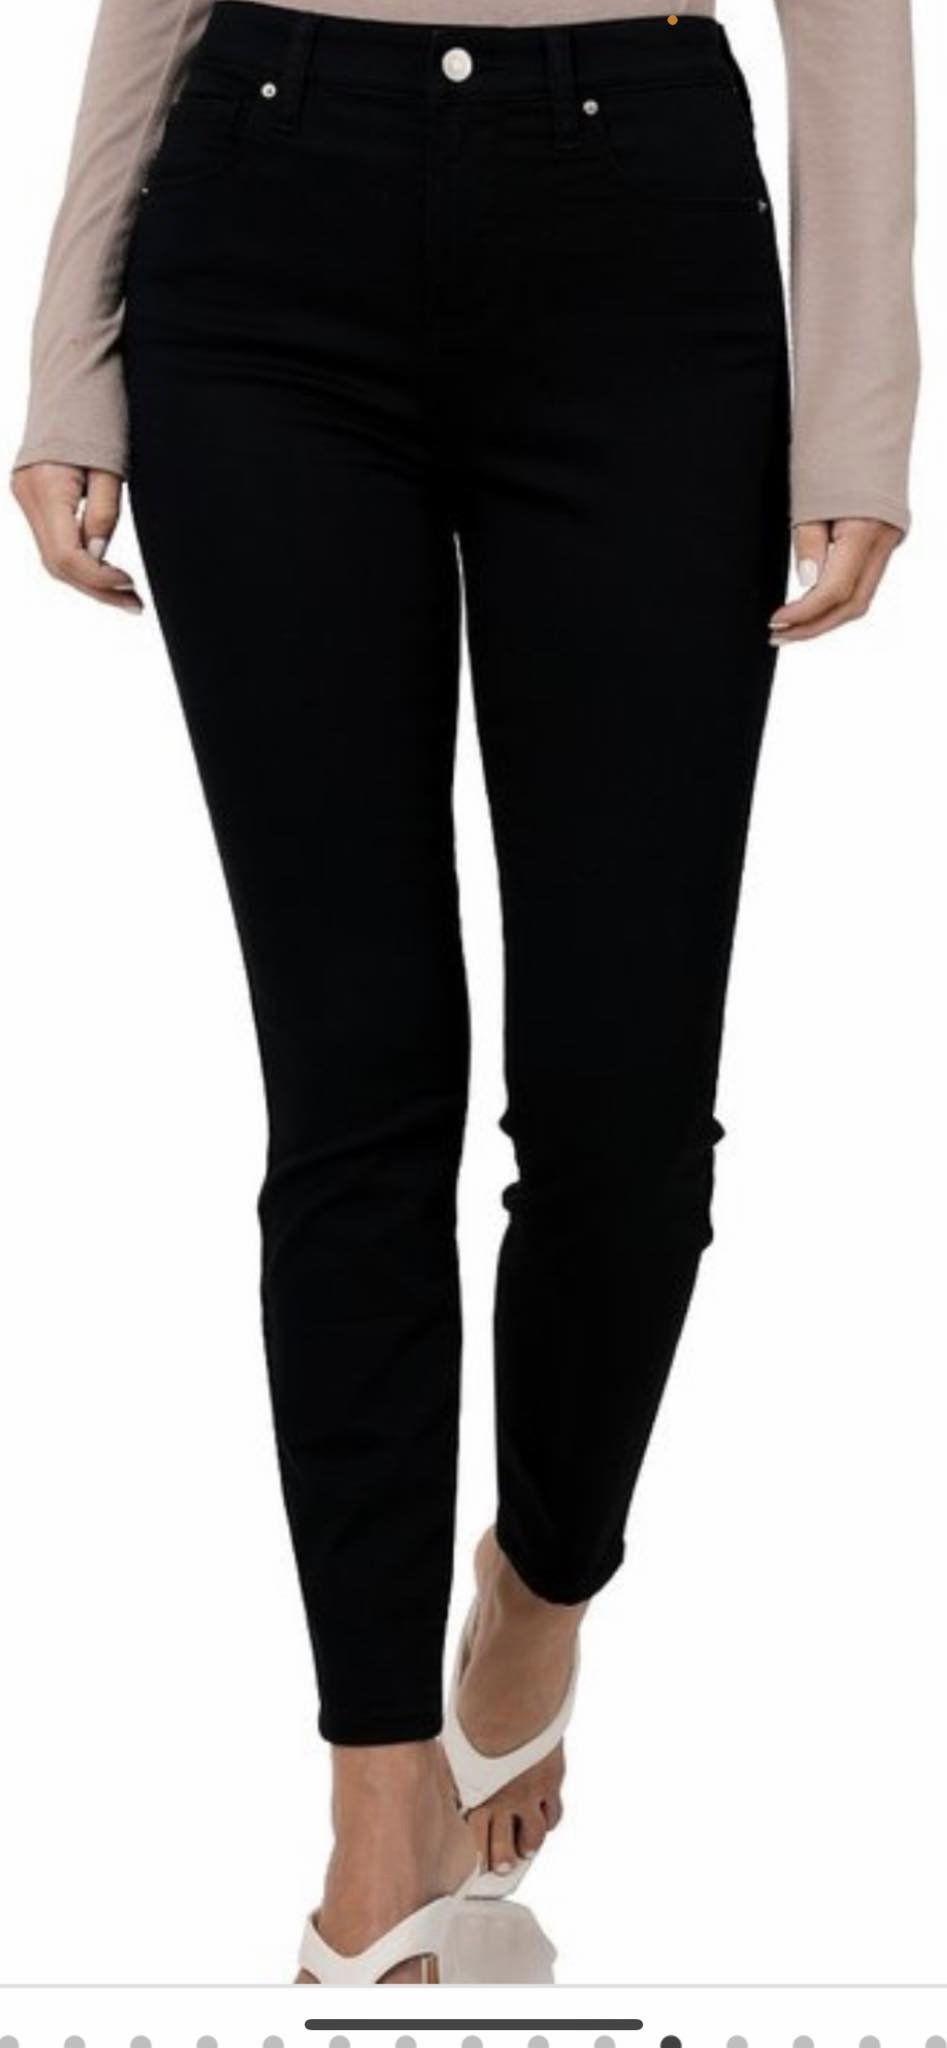 Zenana Stretch Color Jeans Skinny Fit many colors to choose from